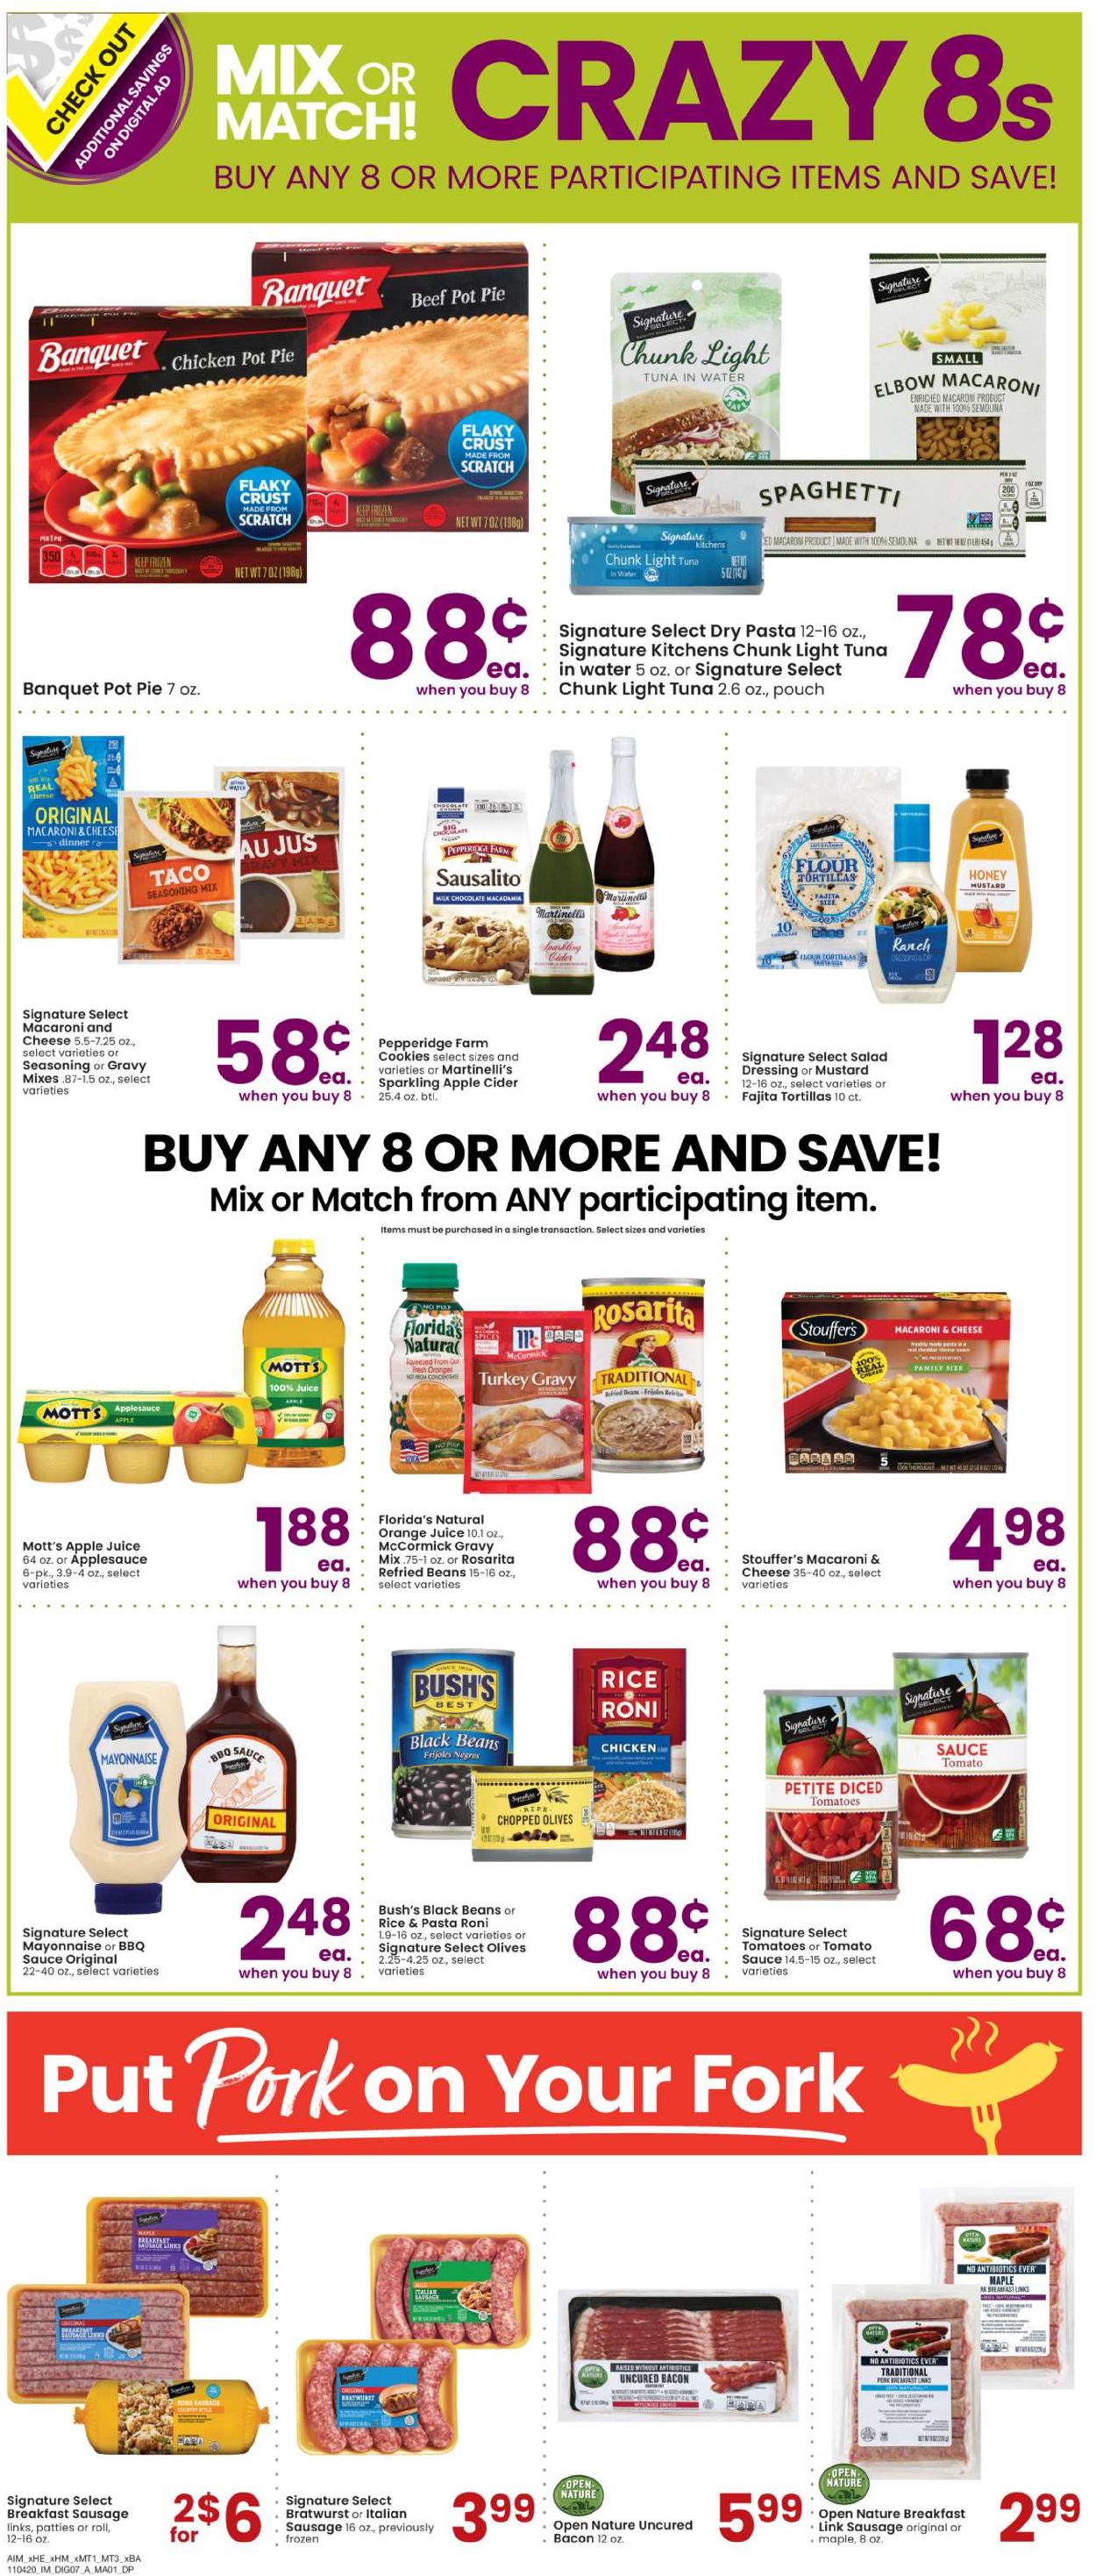 Albertsons Ad from 11/04/2020